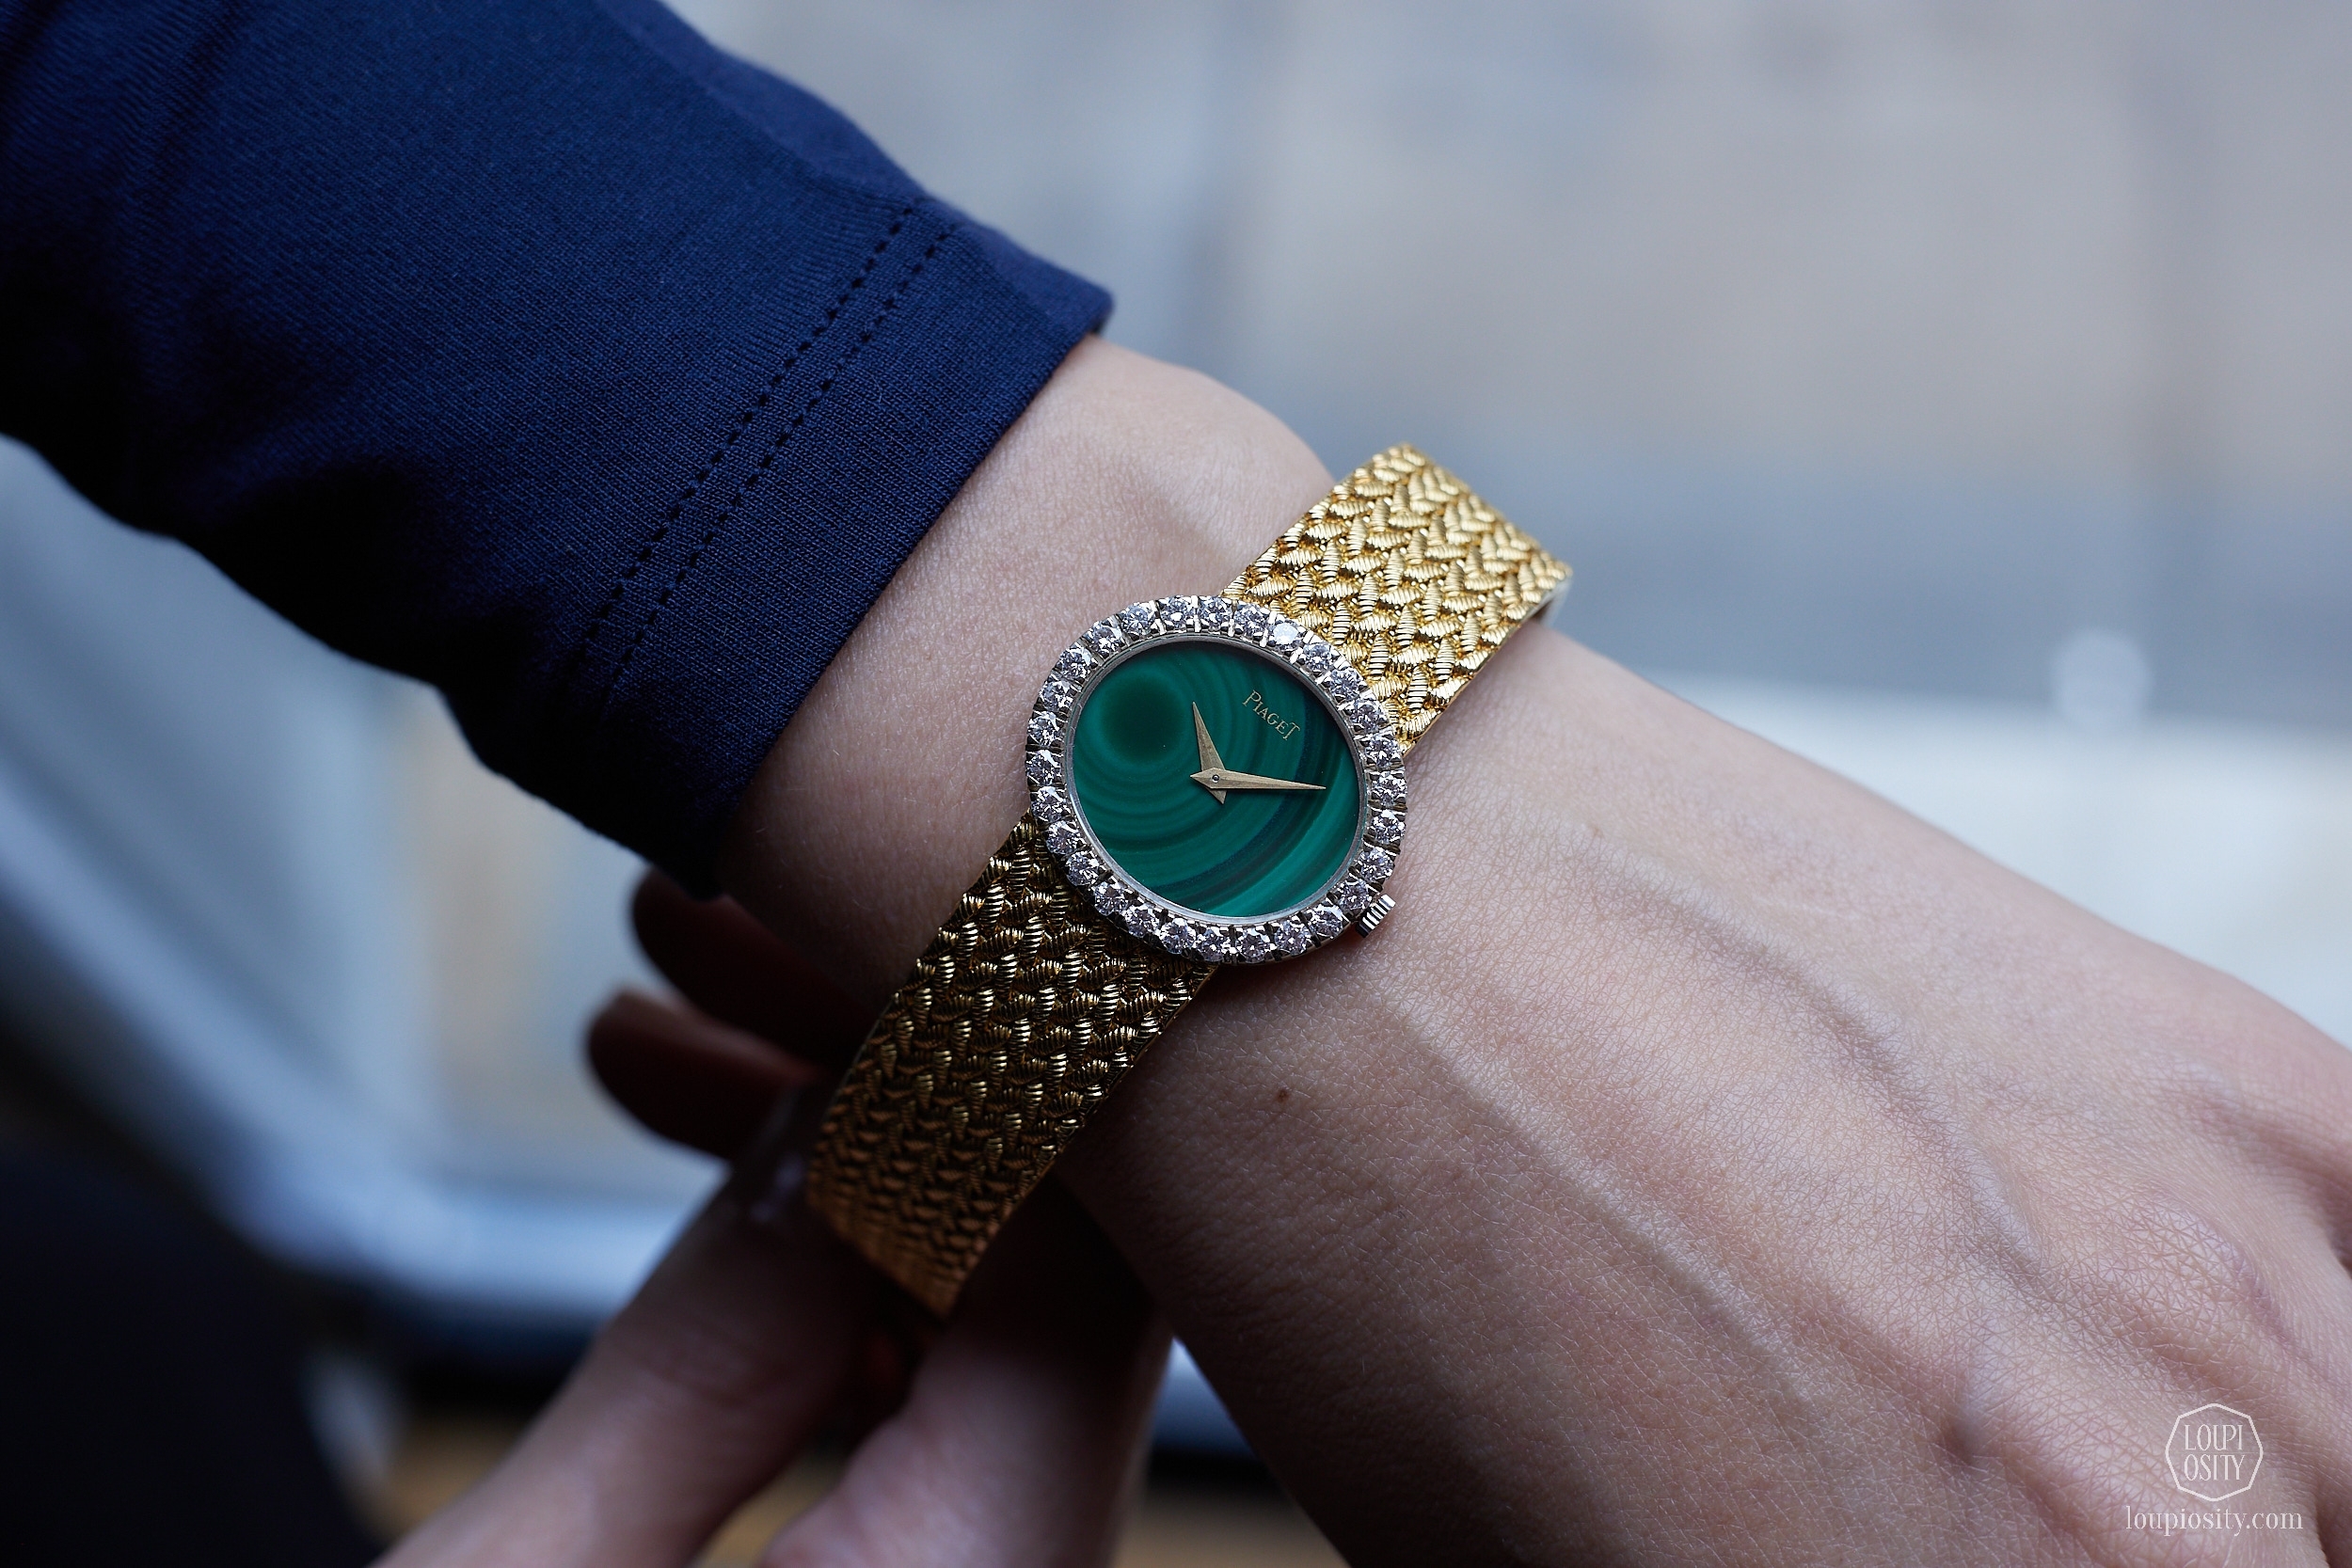 Lot 431 Piaget watch with malachite dial